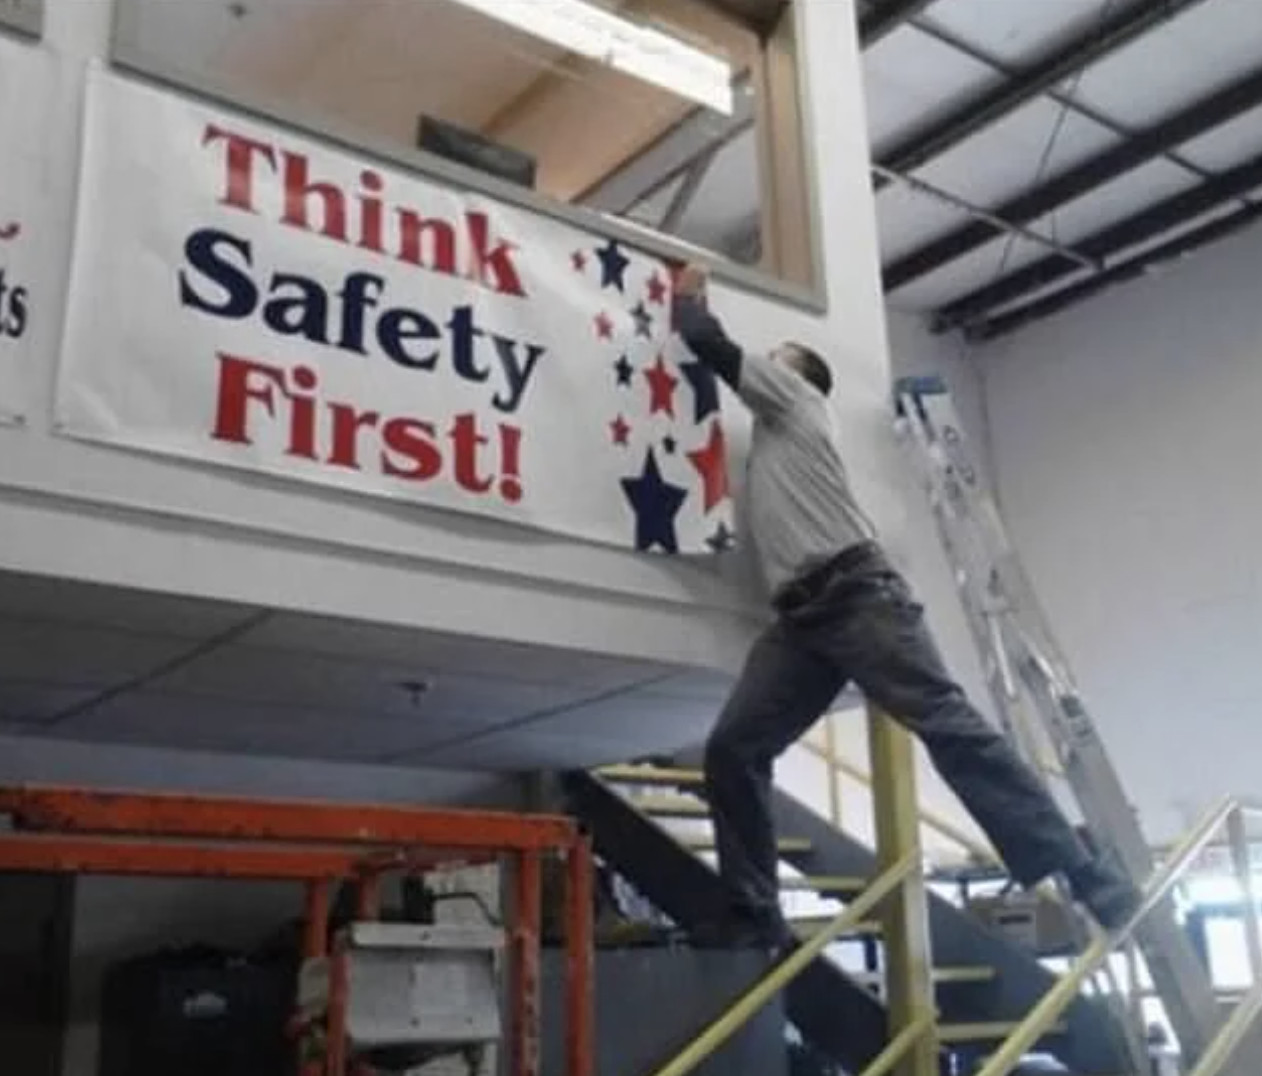 Person on top of a ladder reaching towards a &quot;Think Safety First!&quot; sign, unsafely balanced